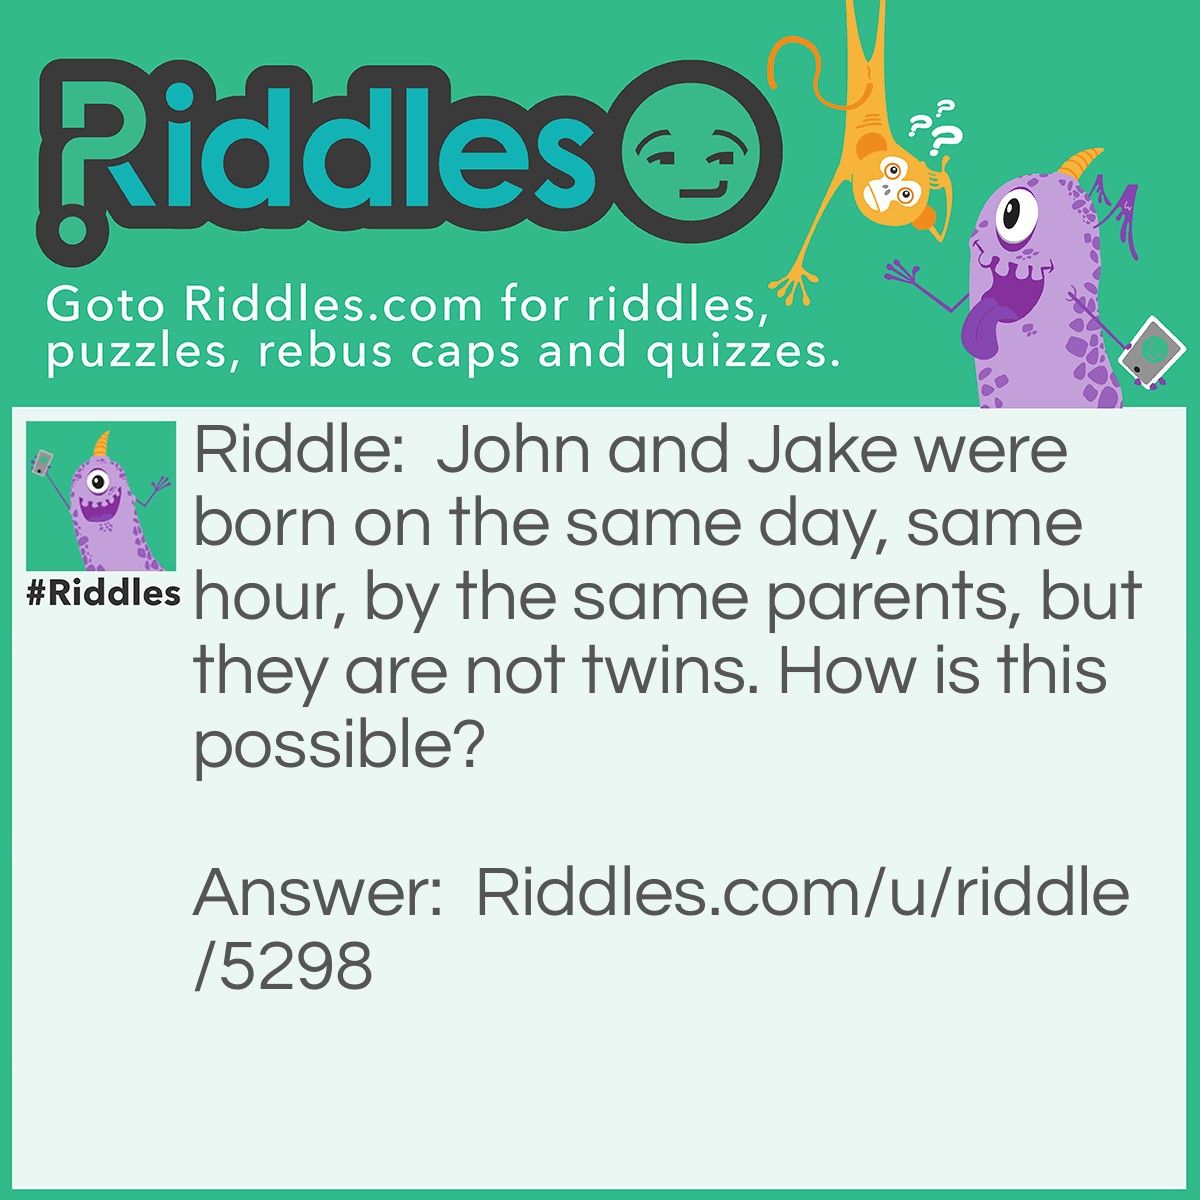 Riddle: John and Jake were born on the same day, same hour, by the same parents, but they are not twins. How is this possible? Answer: John and Jake are triplets, who said they didn't have a brother?